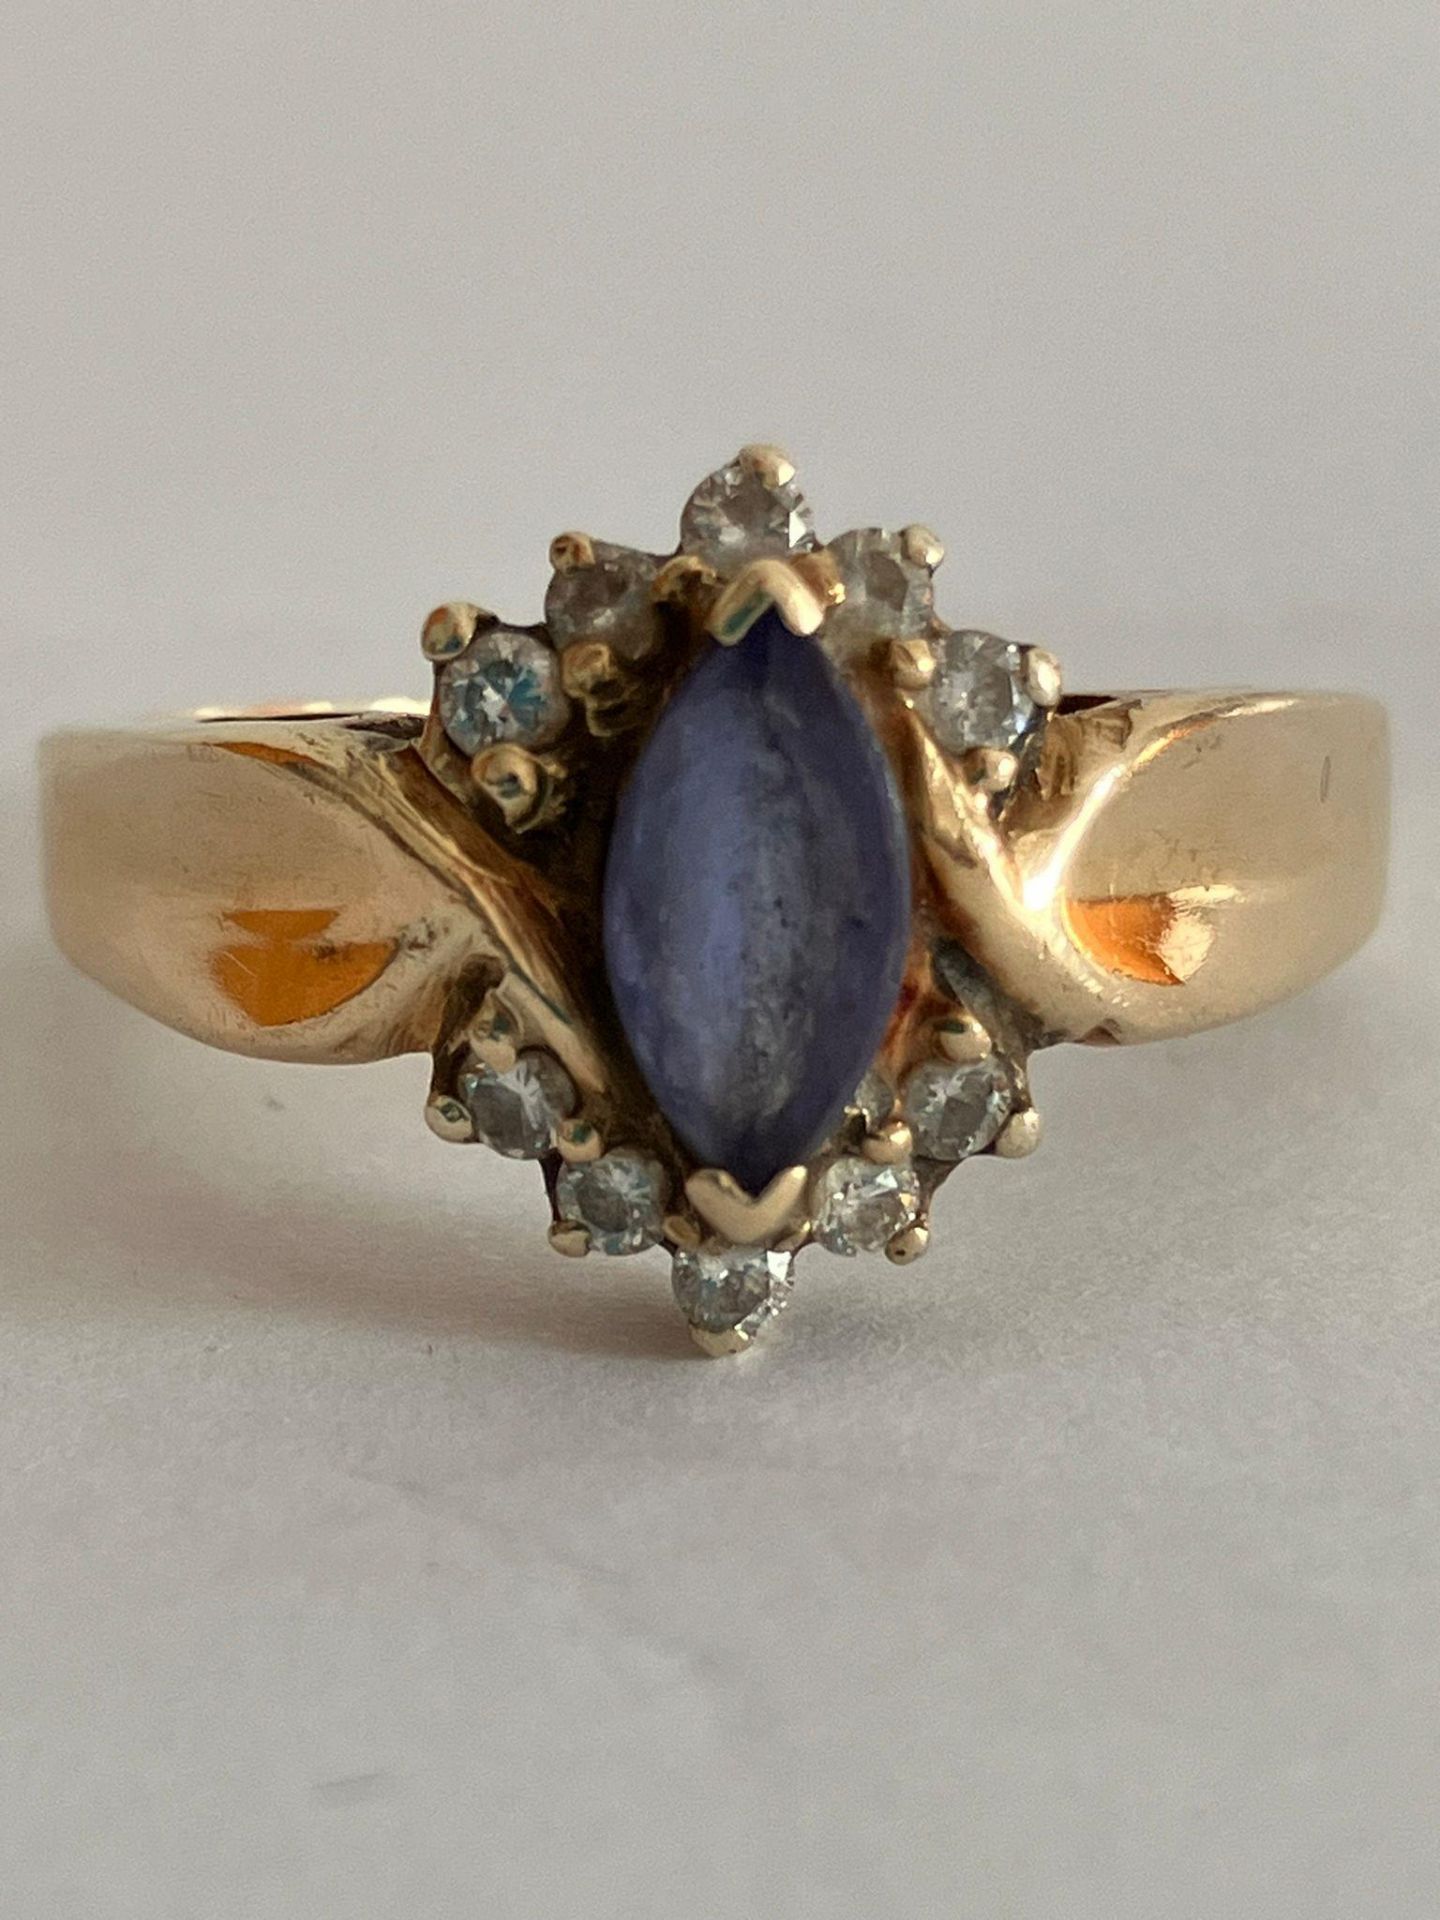 Impressive 14 carat YELLOW GOLD & DIAMOND RING, Having a Blue Bagette to centre with Diamonds